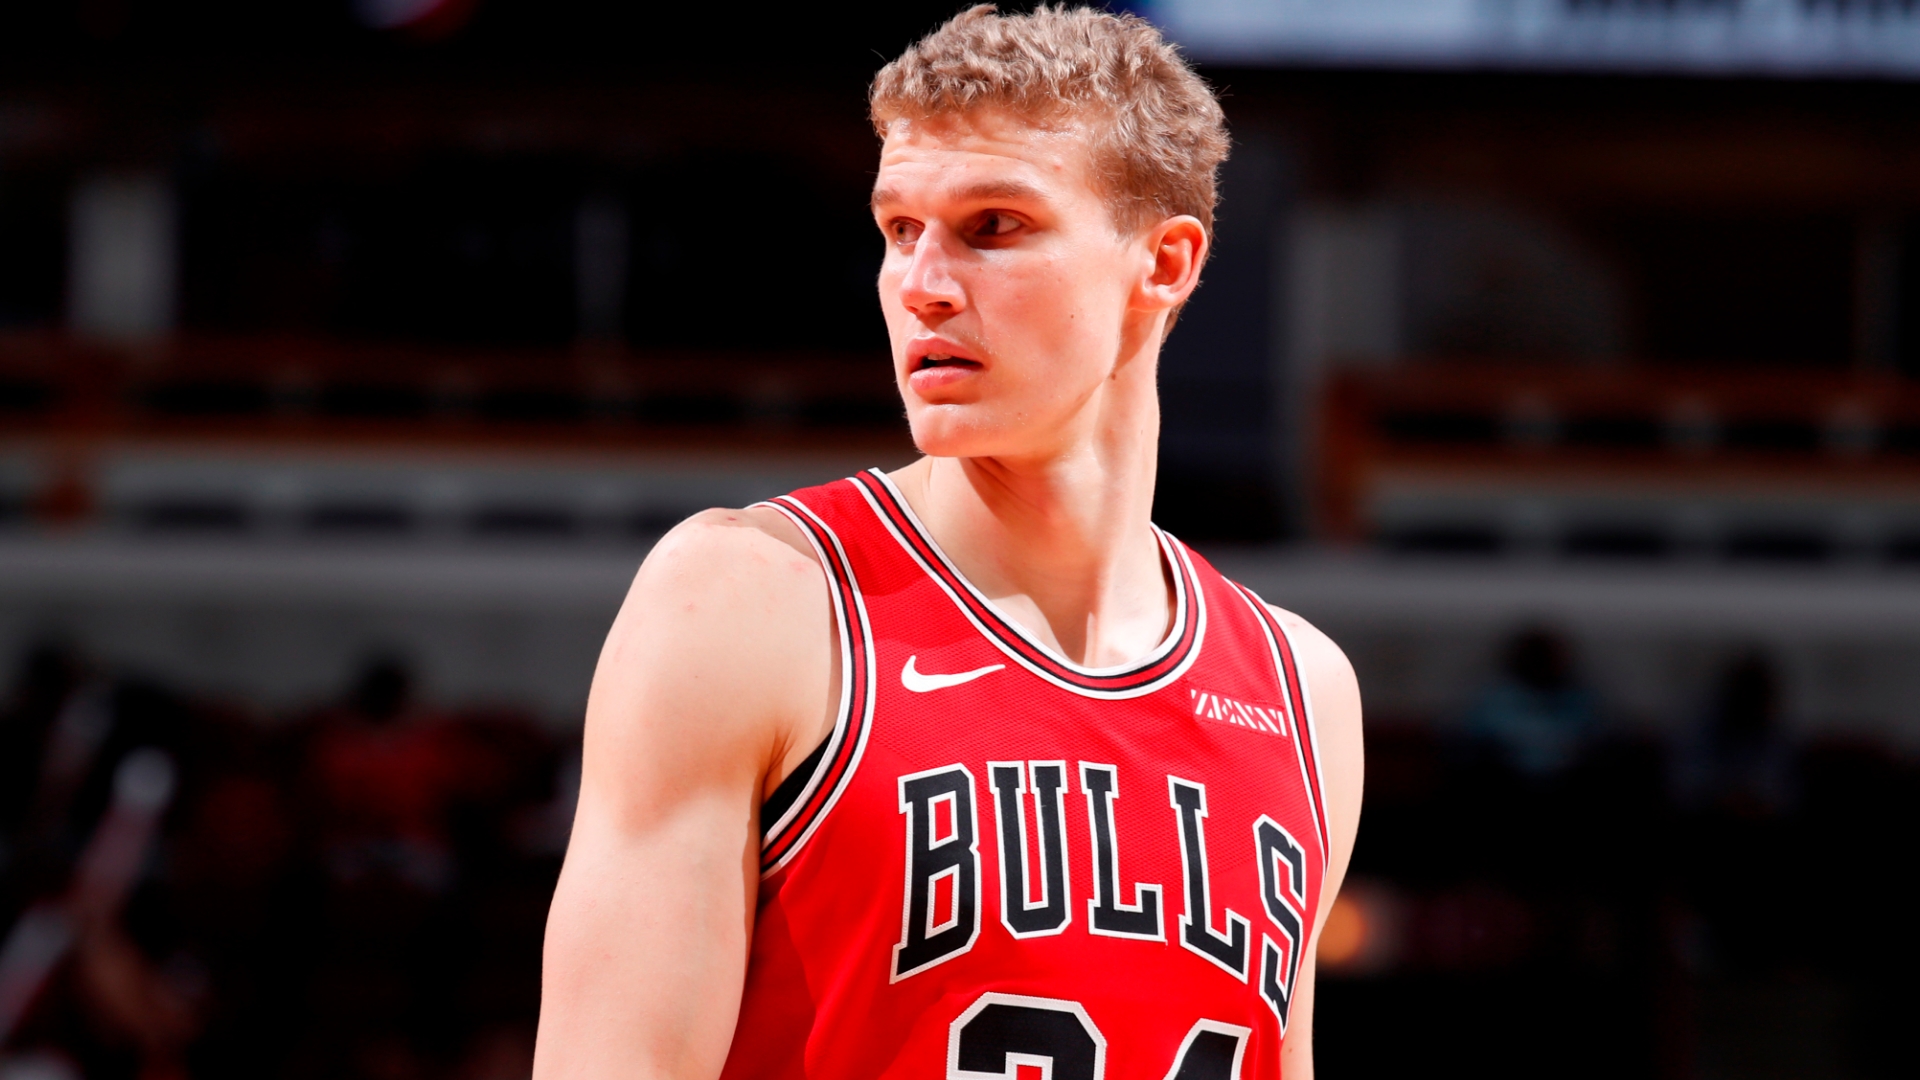 Lauri Markkanen and his arrival in the Cleveland Cavaliers: "I still haven't been near my ceiling" | NBA.com Spain | The Official Site of the NBA